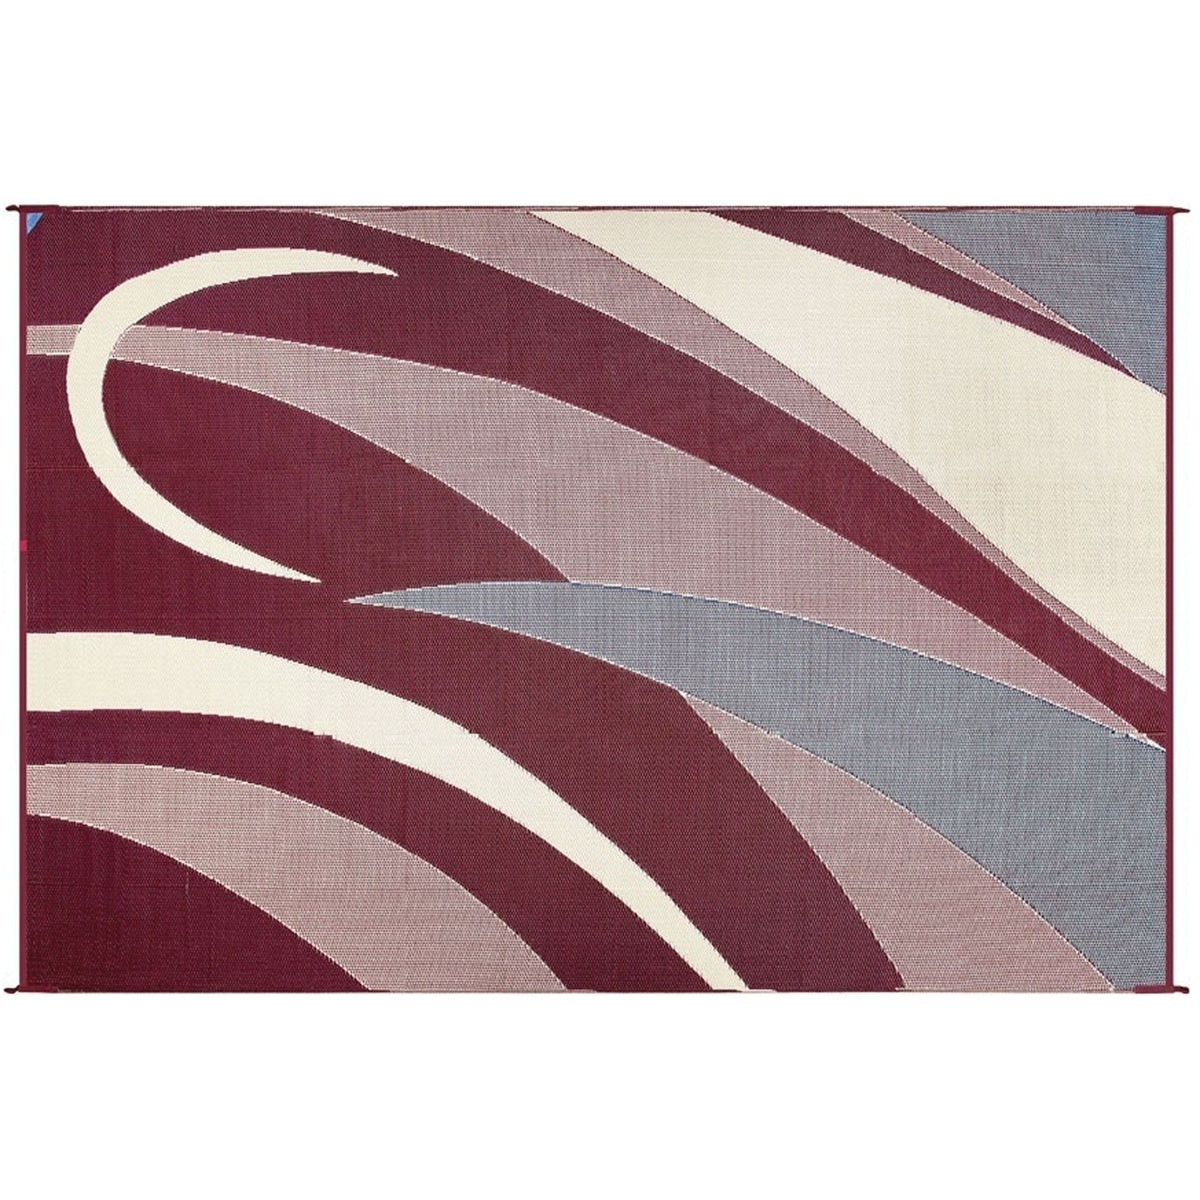 Ming's Mark Qualifies for Free Shipping Ming's Mark Camping Graphic Patio Mat 8' x 12' Burgundy/Black #GA5